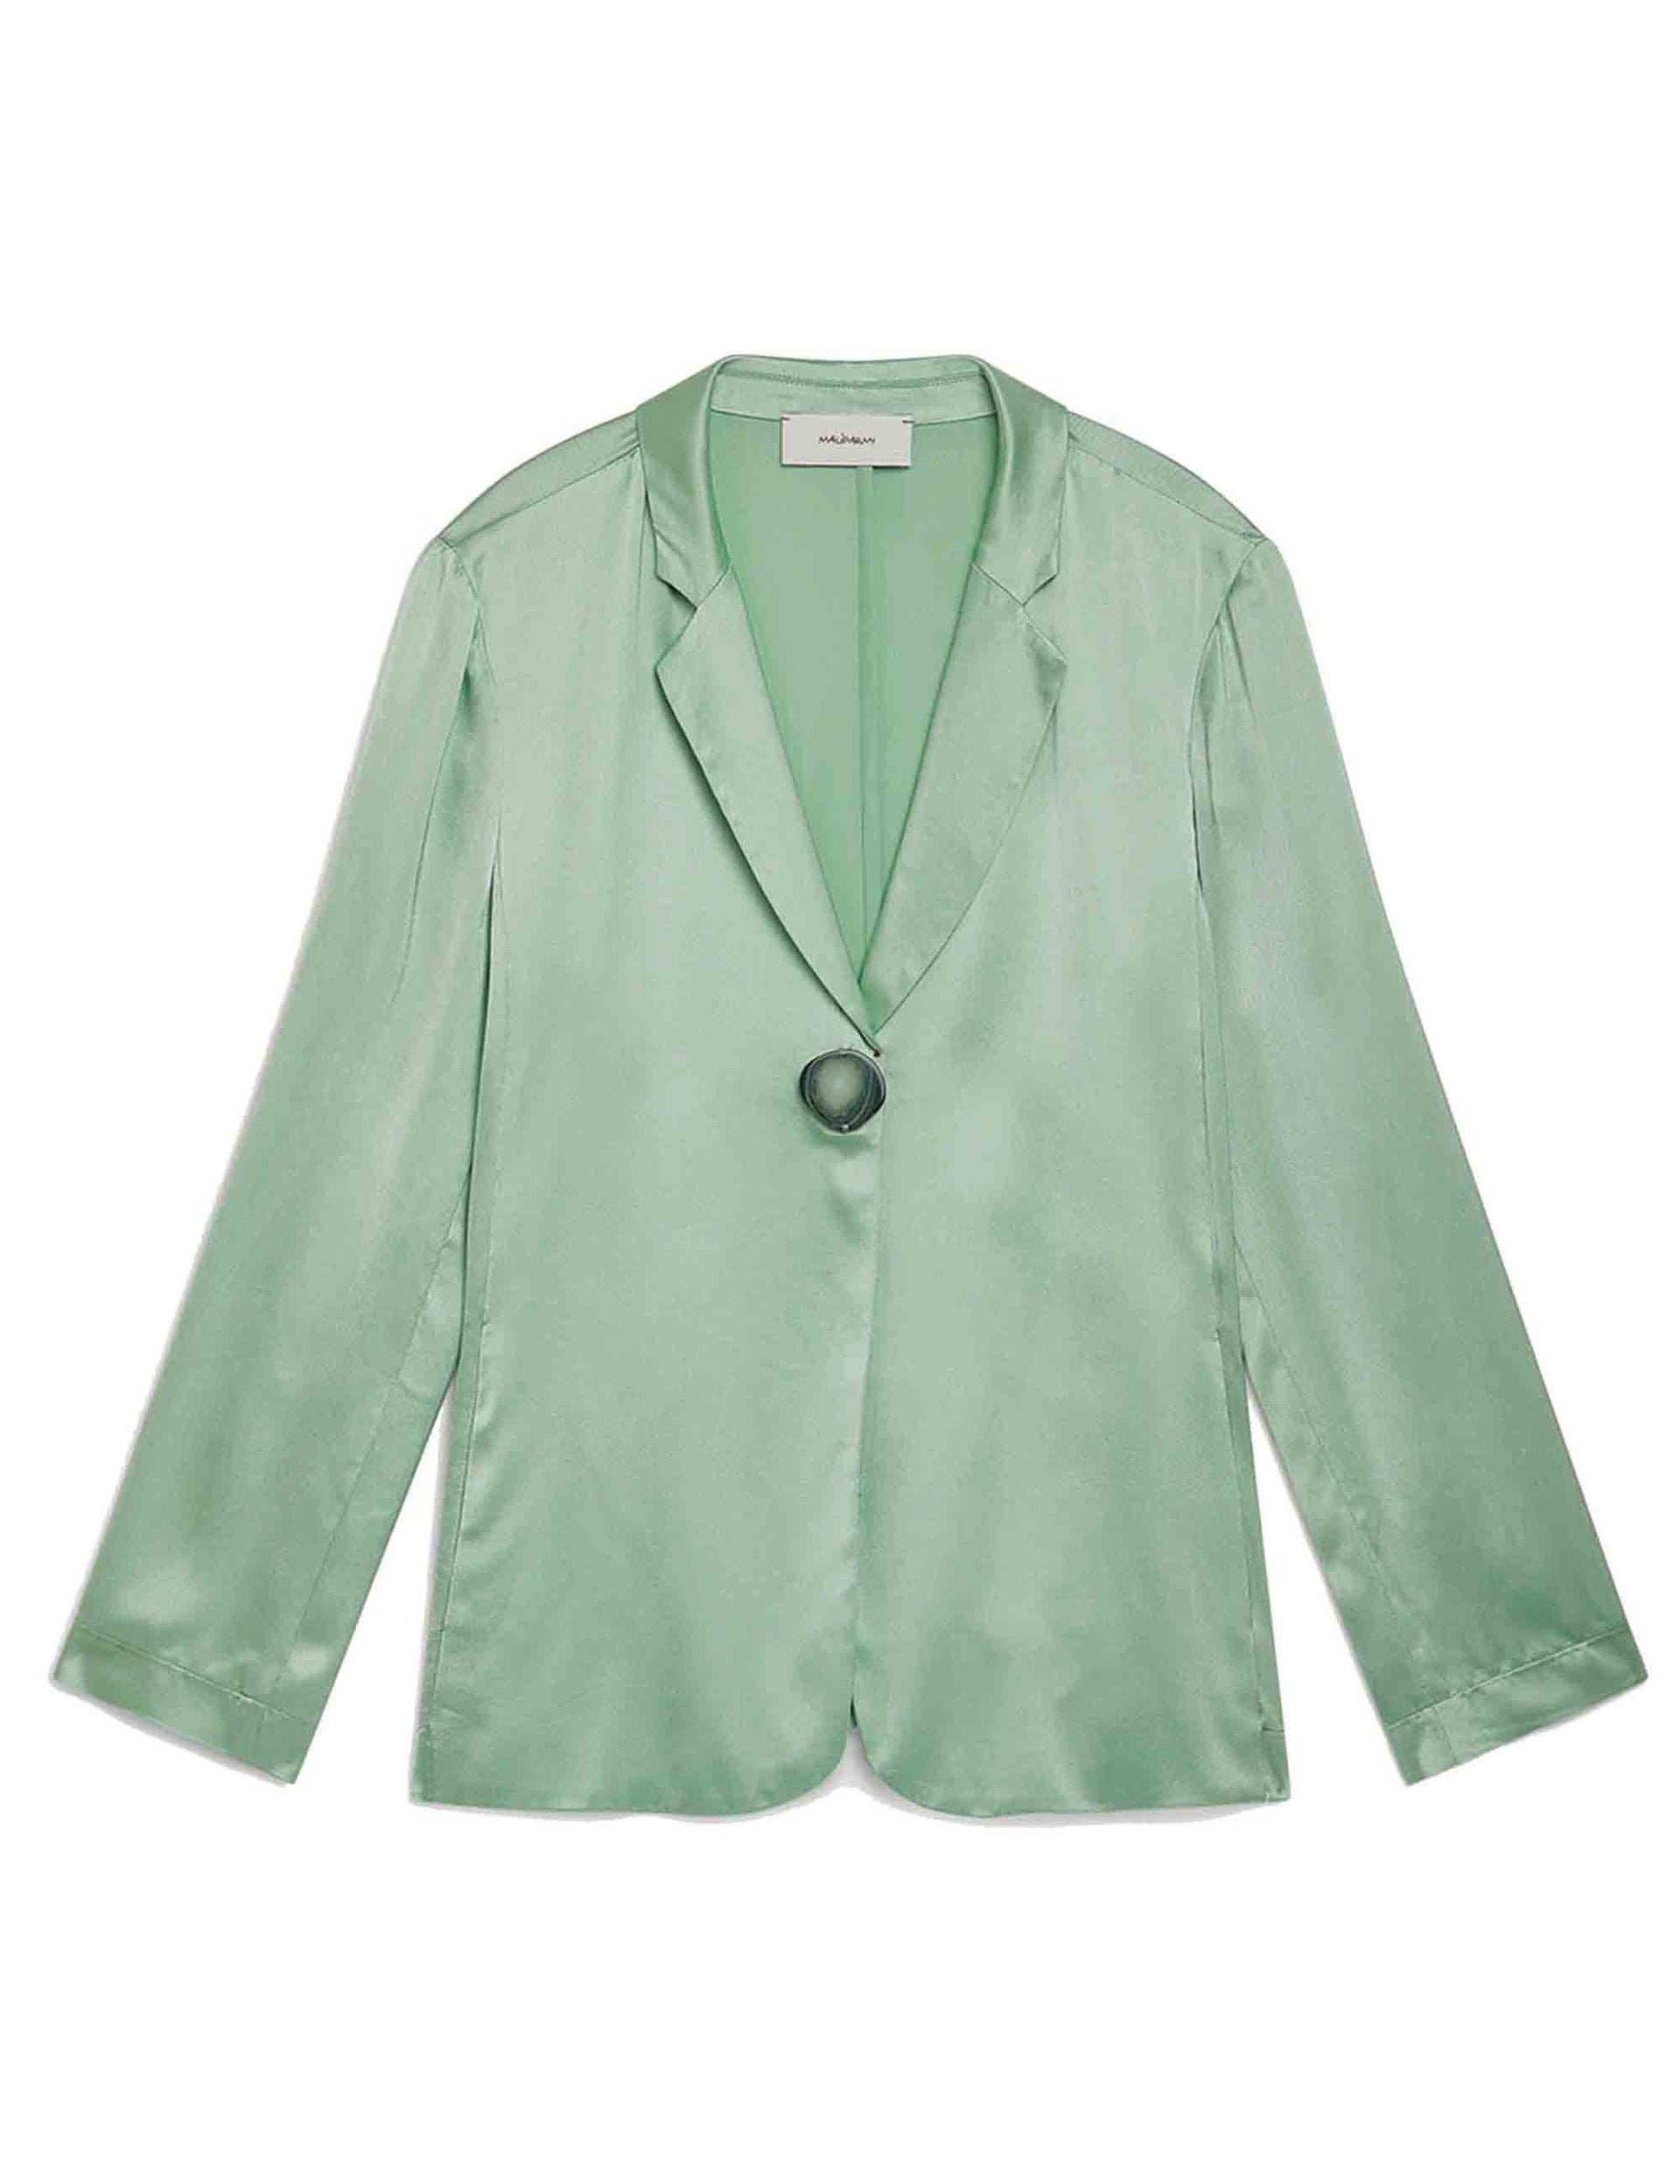 Shiny single-breasted women's jackets in green cady with special button